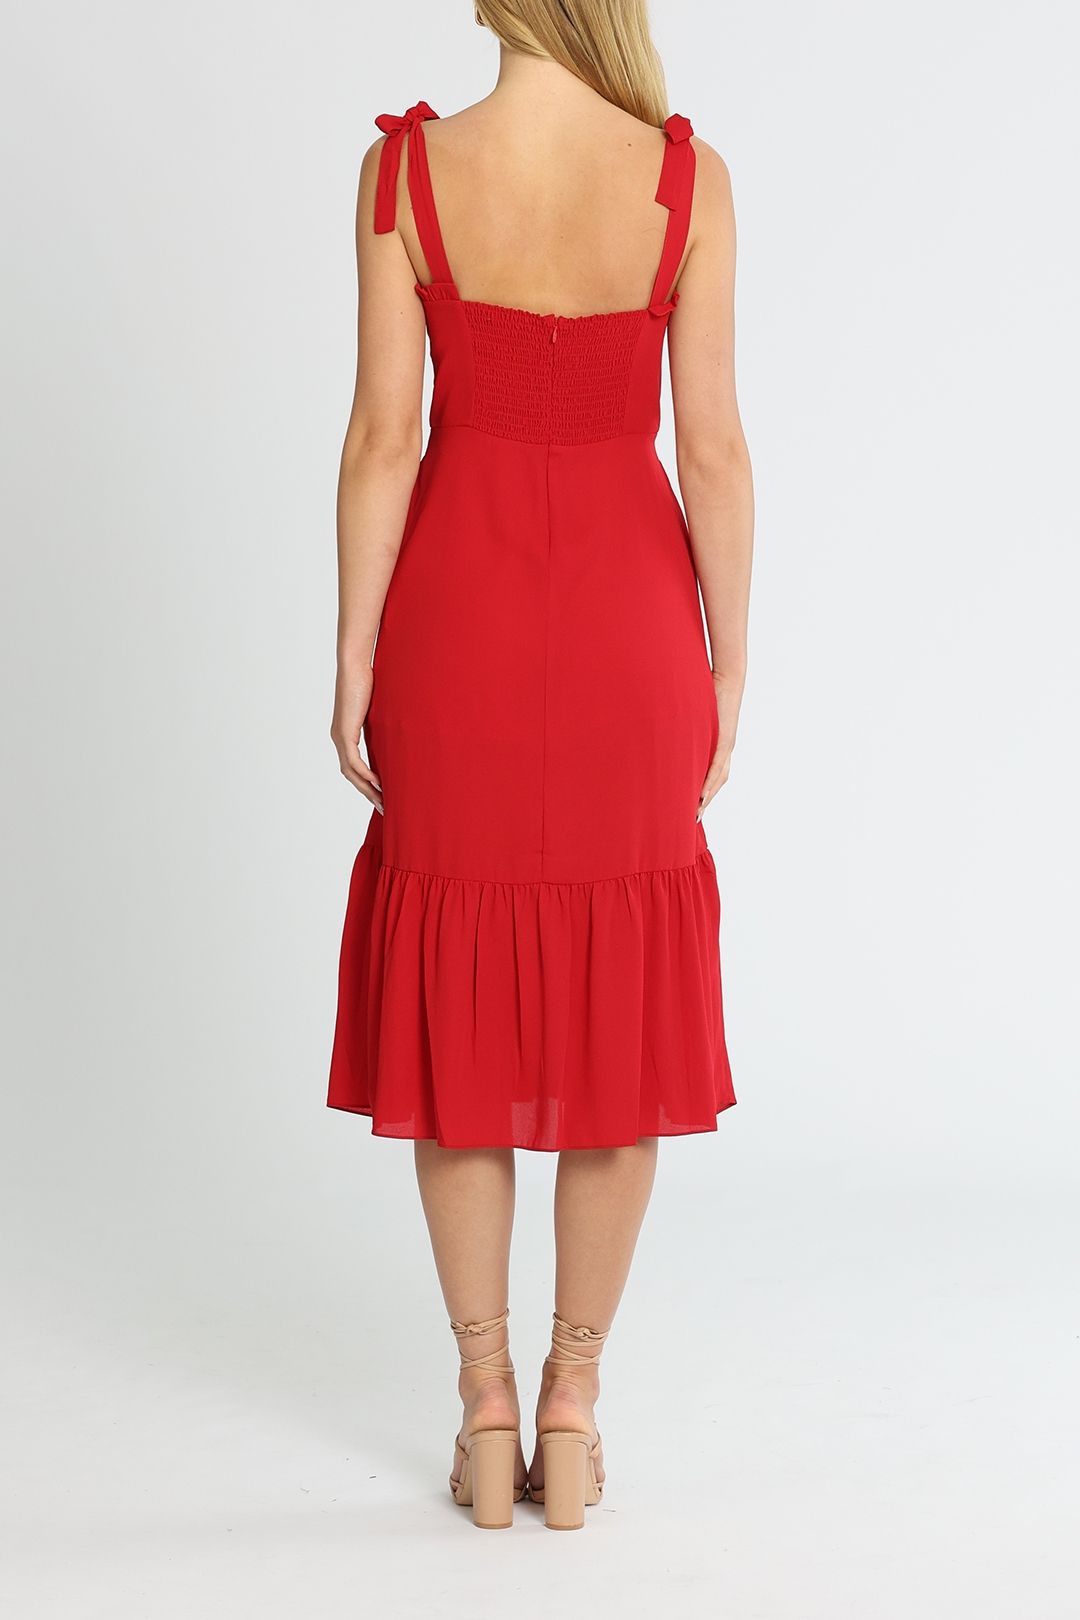 Belle and Bloom Summer Storm Midi Dress Red Shirred Back